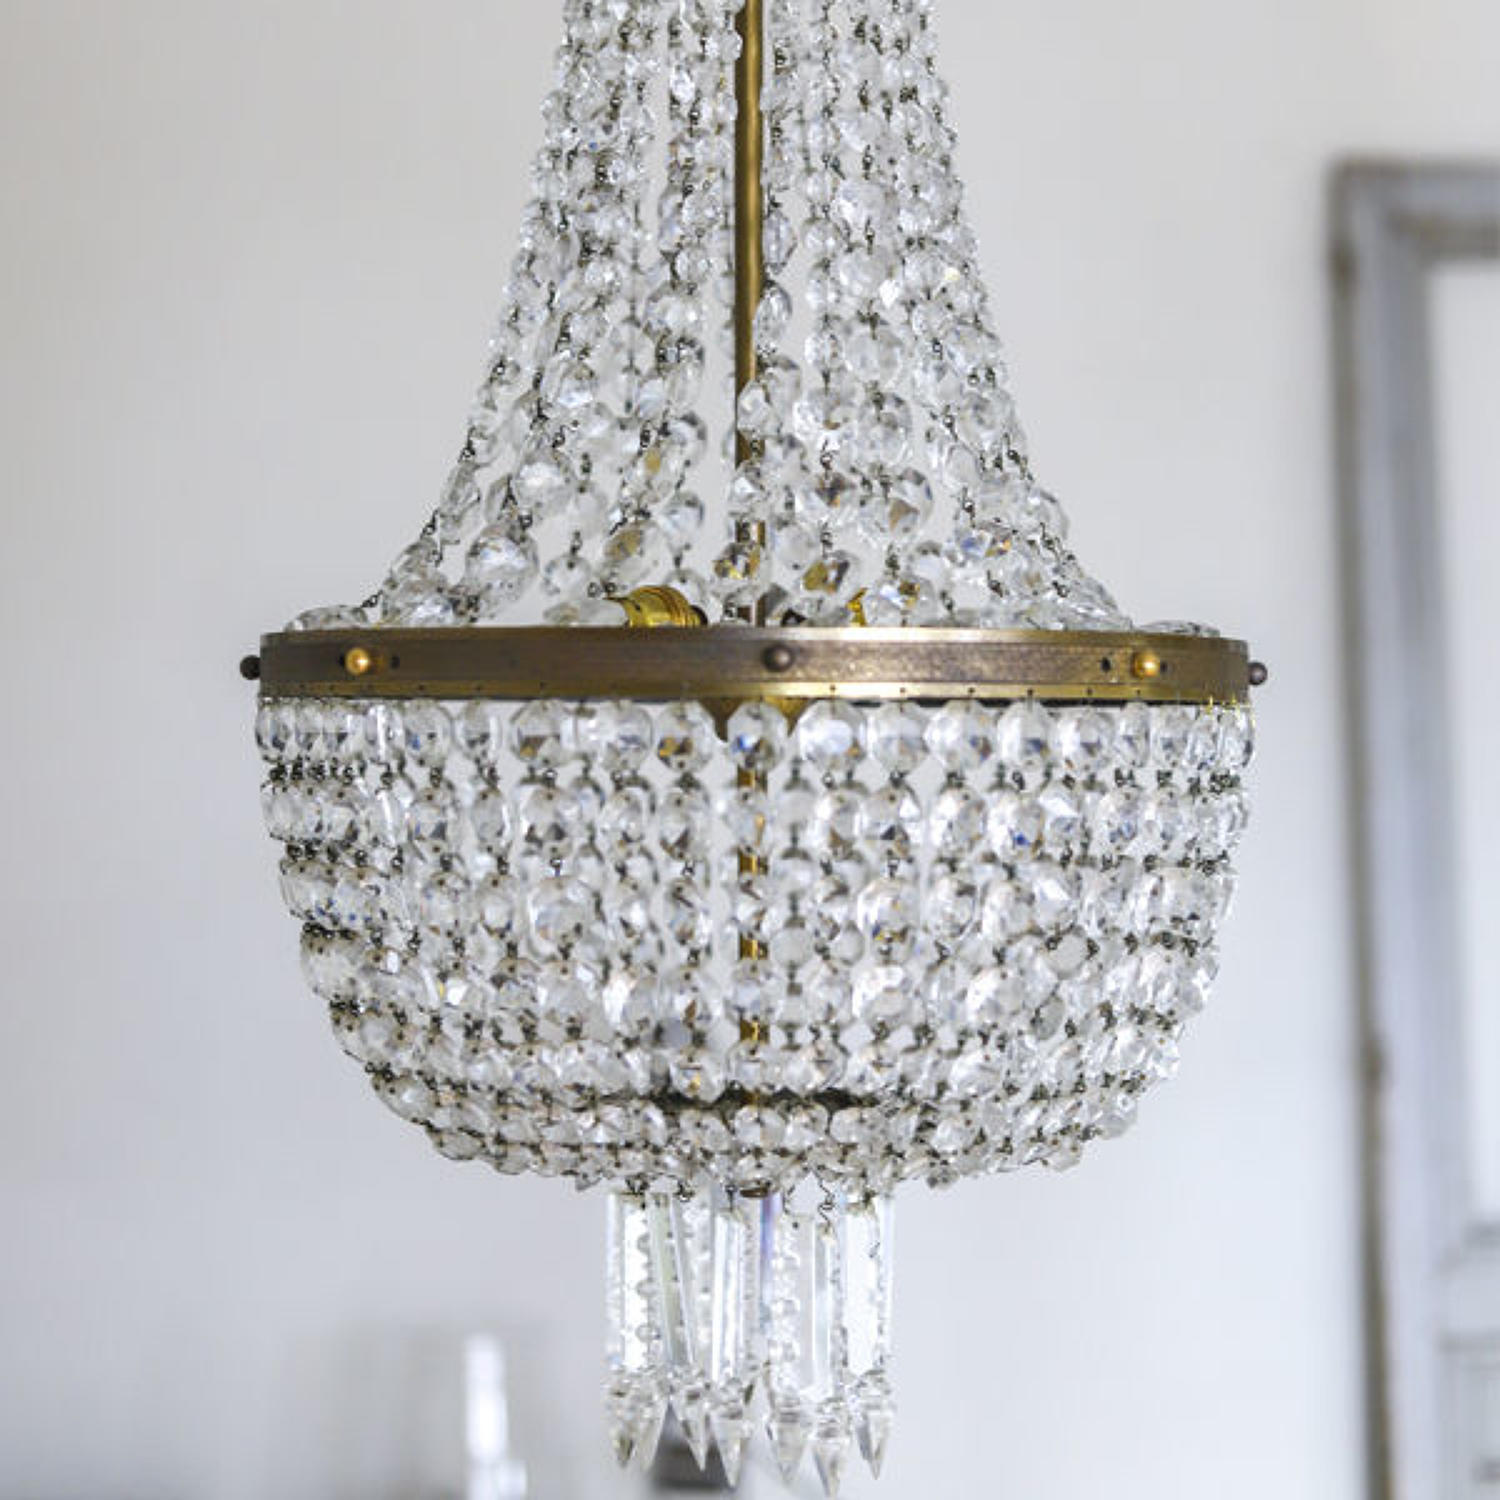 Huge antique French crystal bag balloon chandelier circa 1910